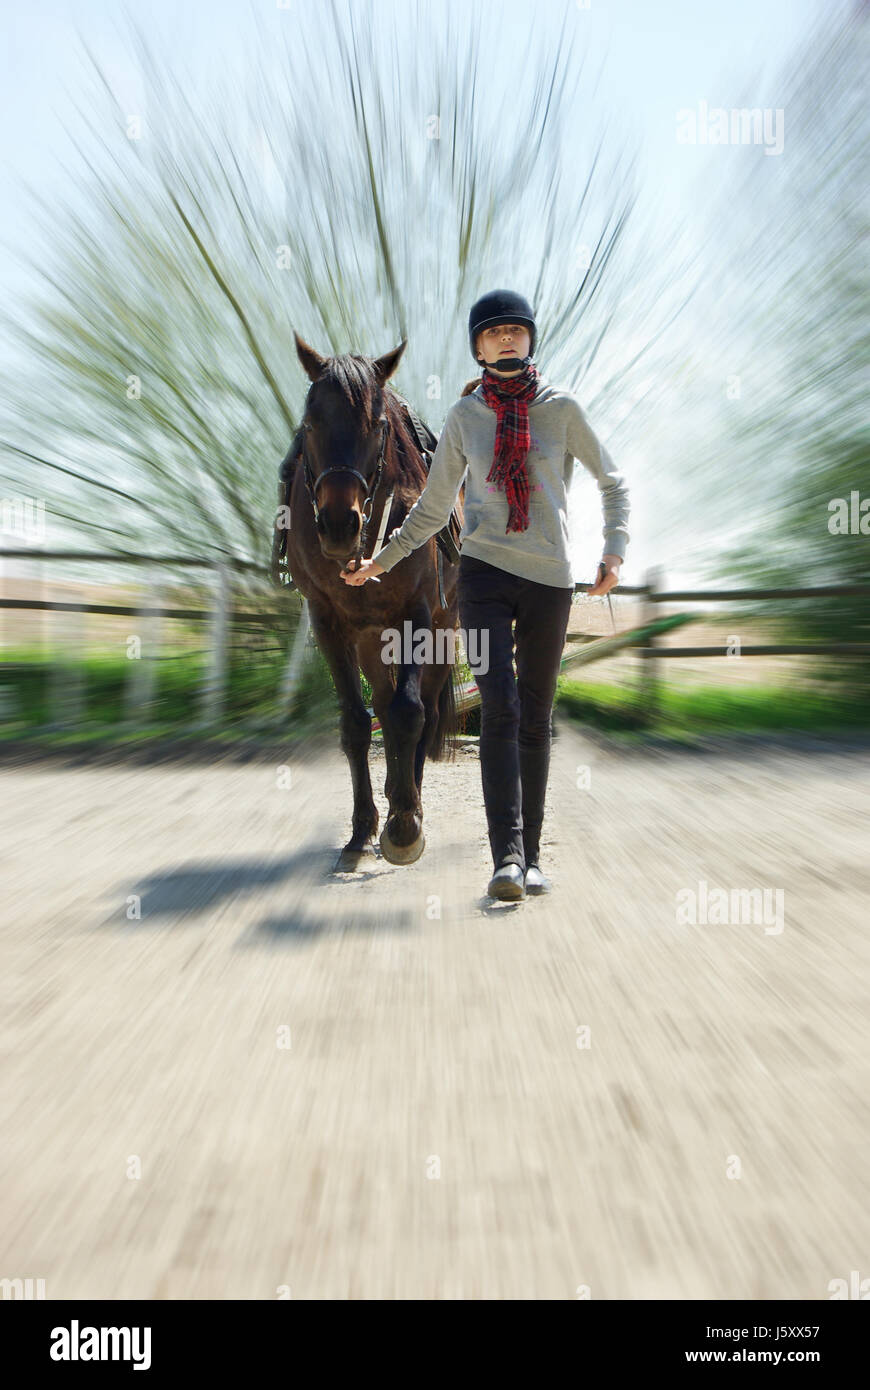 motion postponement moving movement ride horse sporty athletic wiry pithy Stock Photo